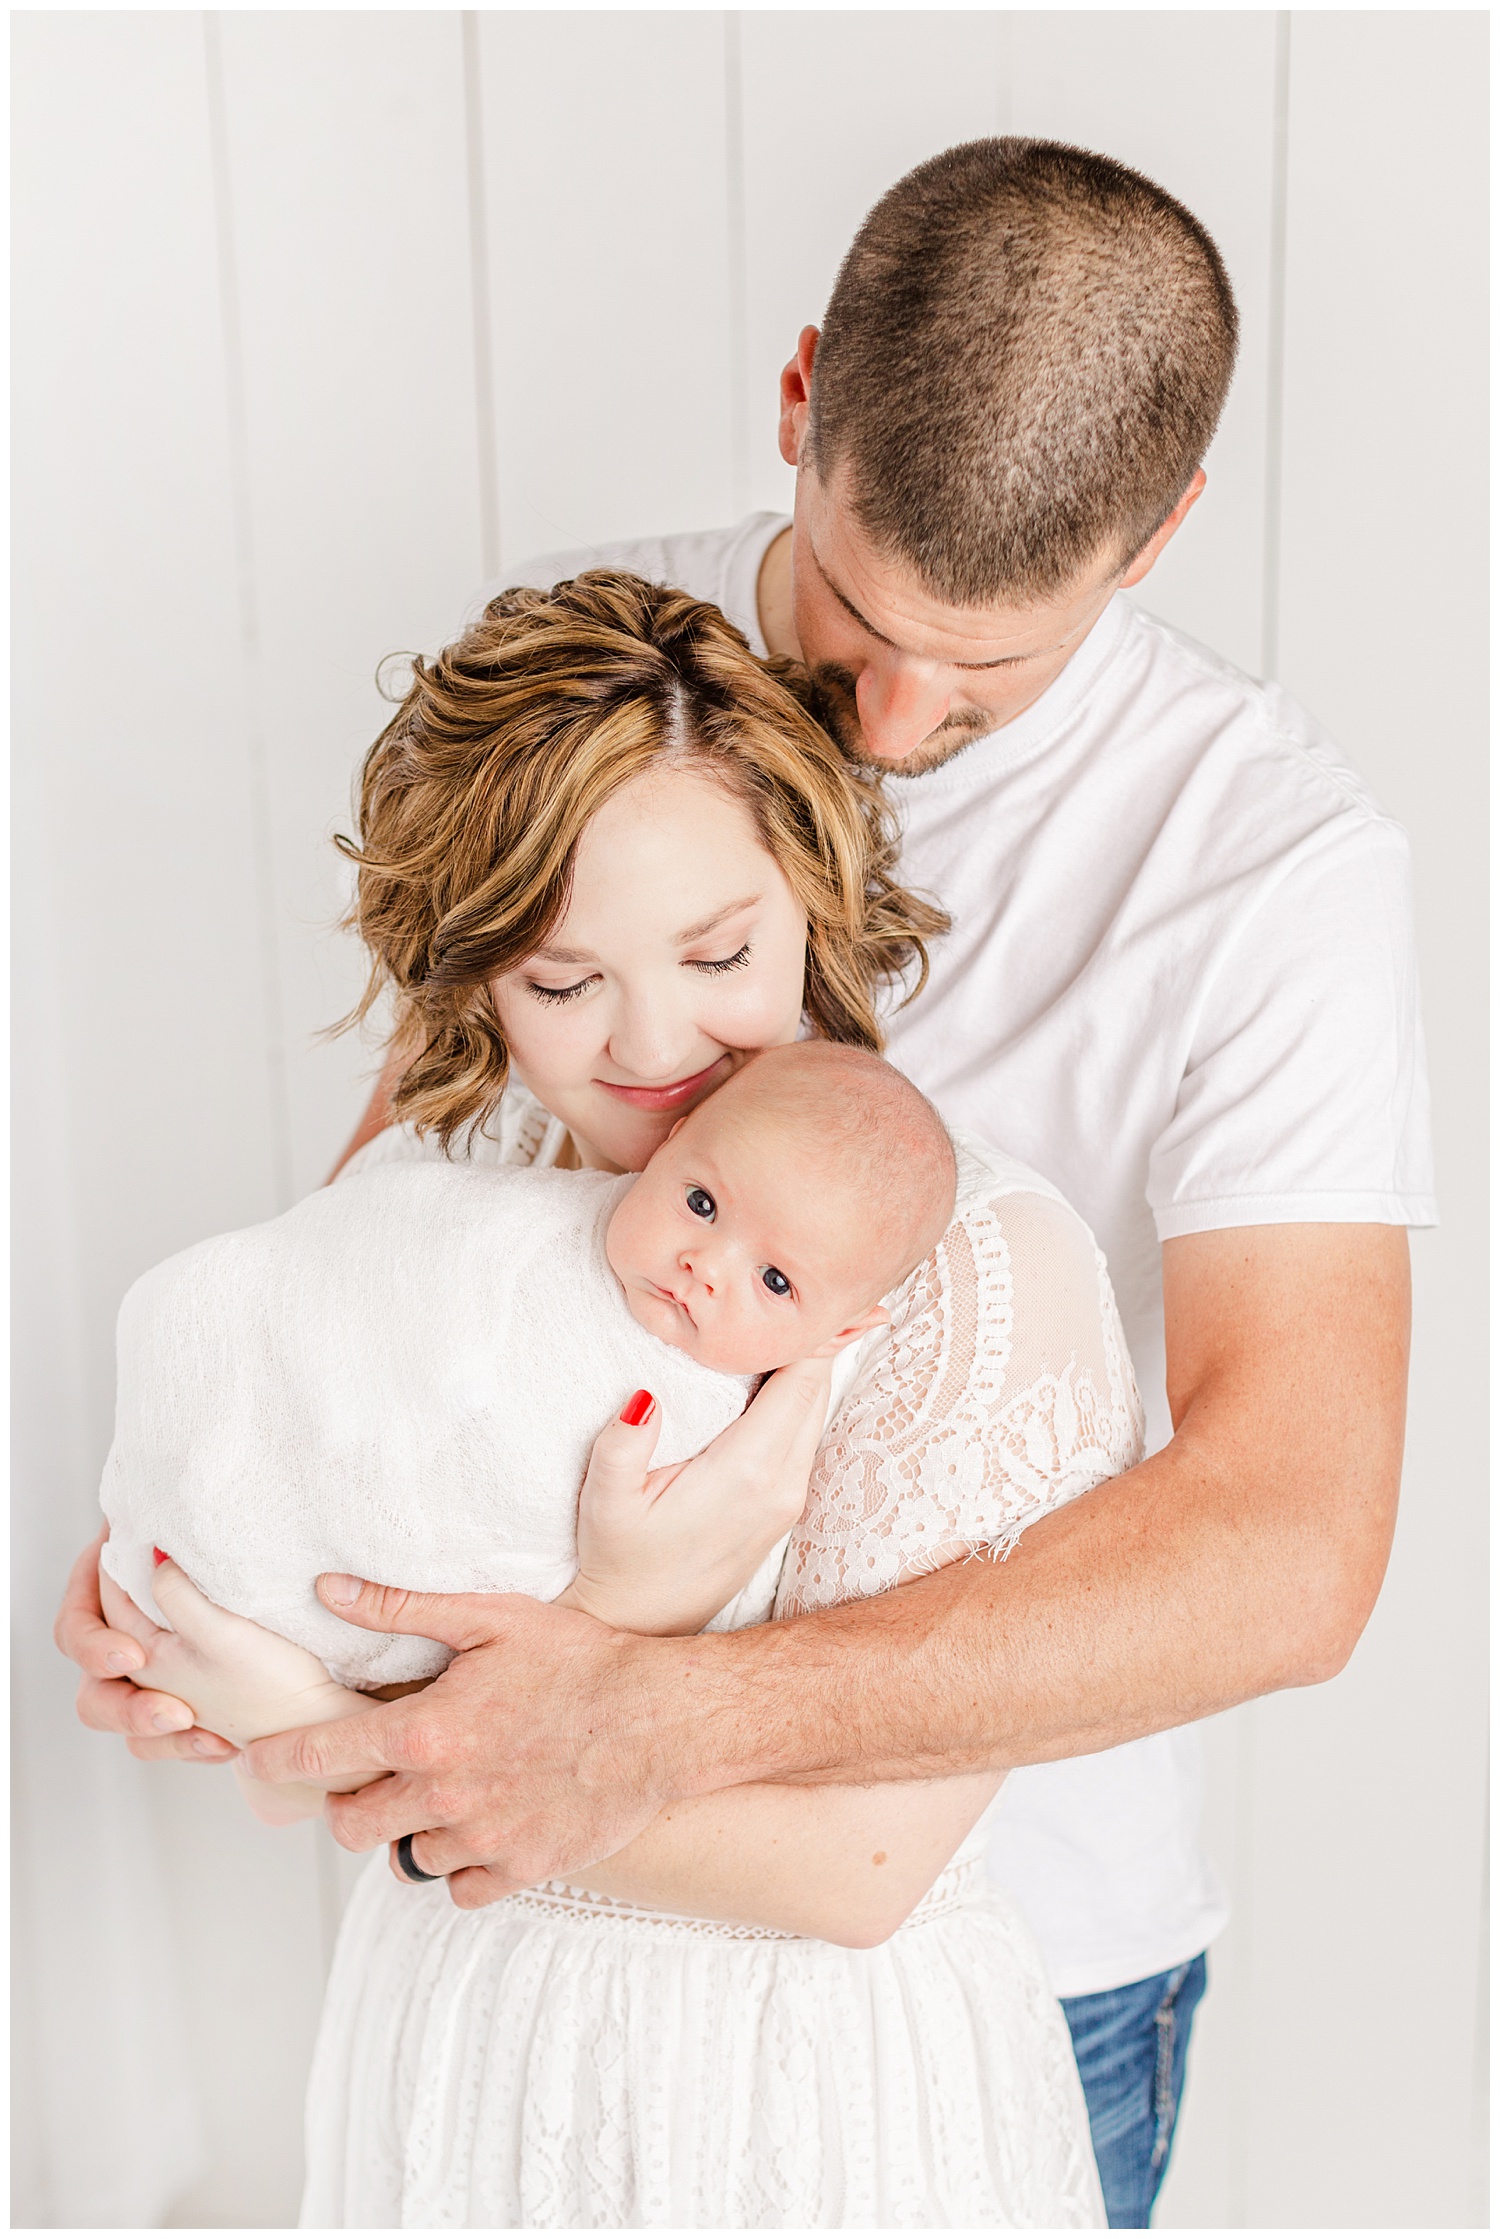 Bree and Josh dressed in white snuggle their new baby boy | CB Studio